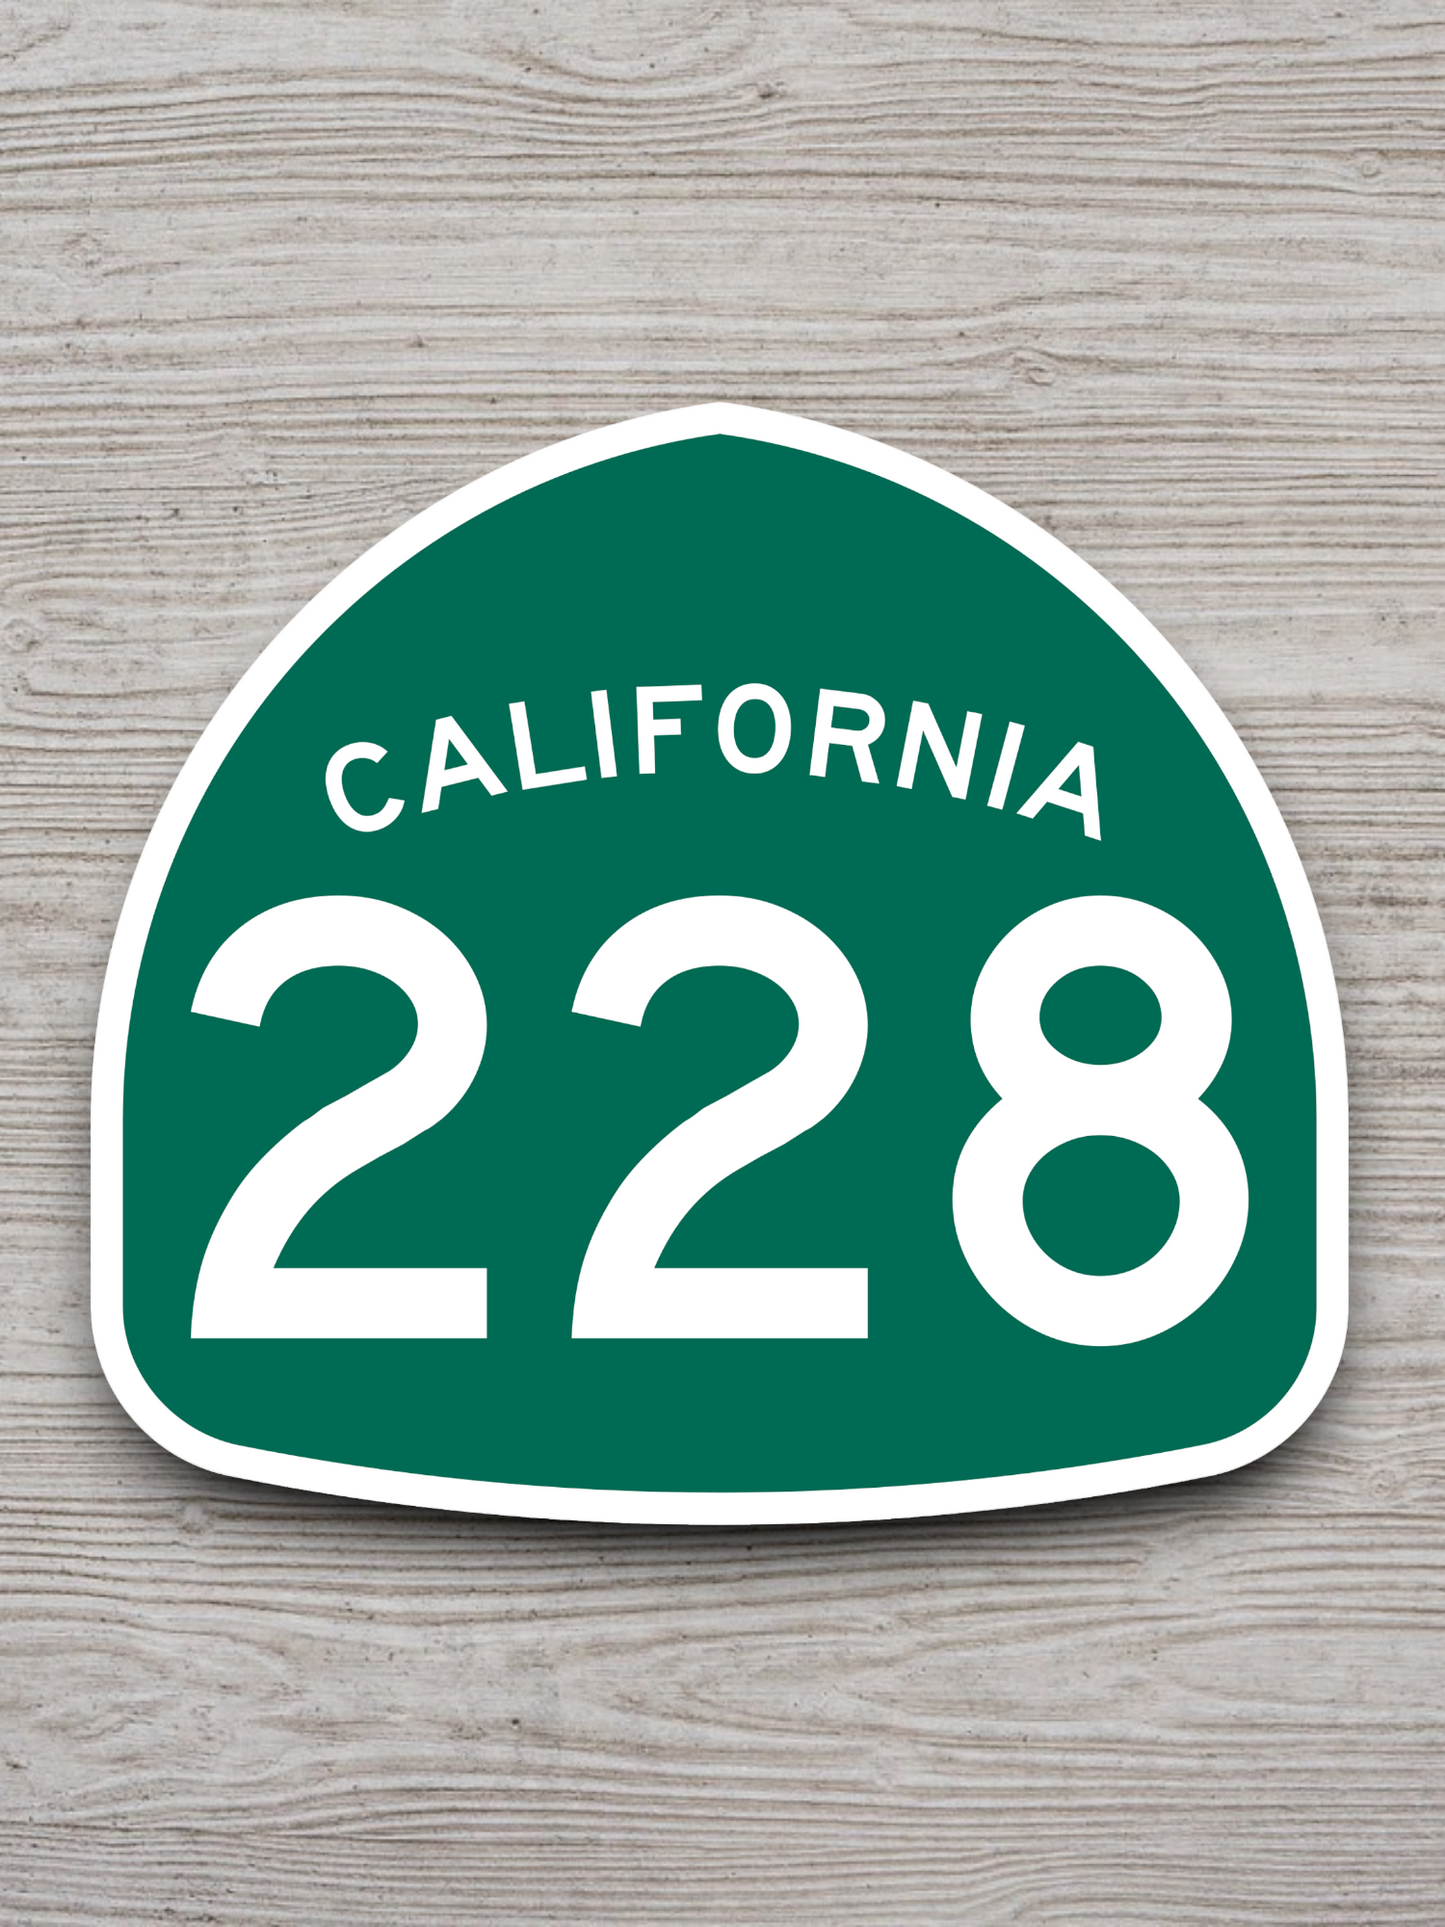 California State Route 228 Road Sign Sticker